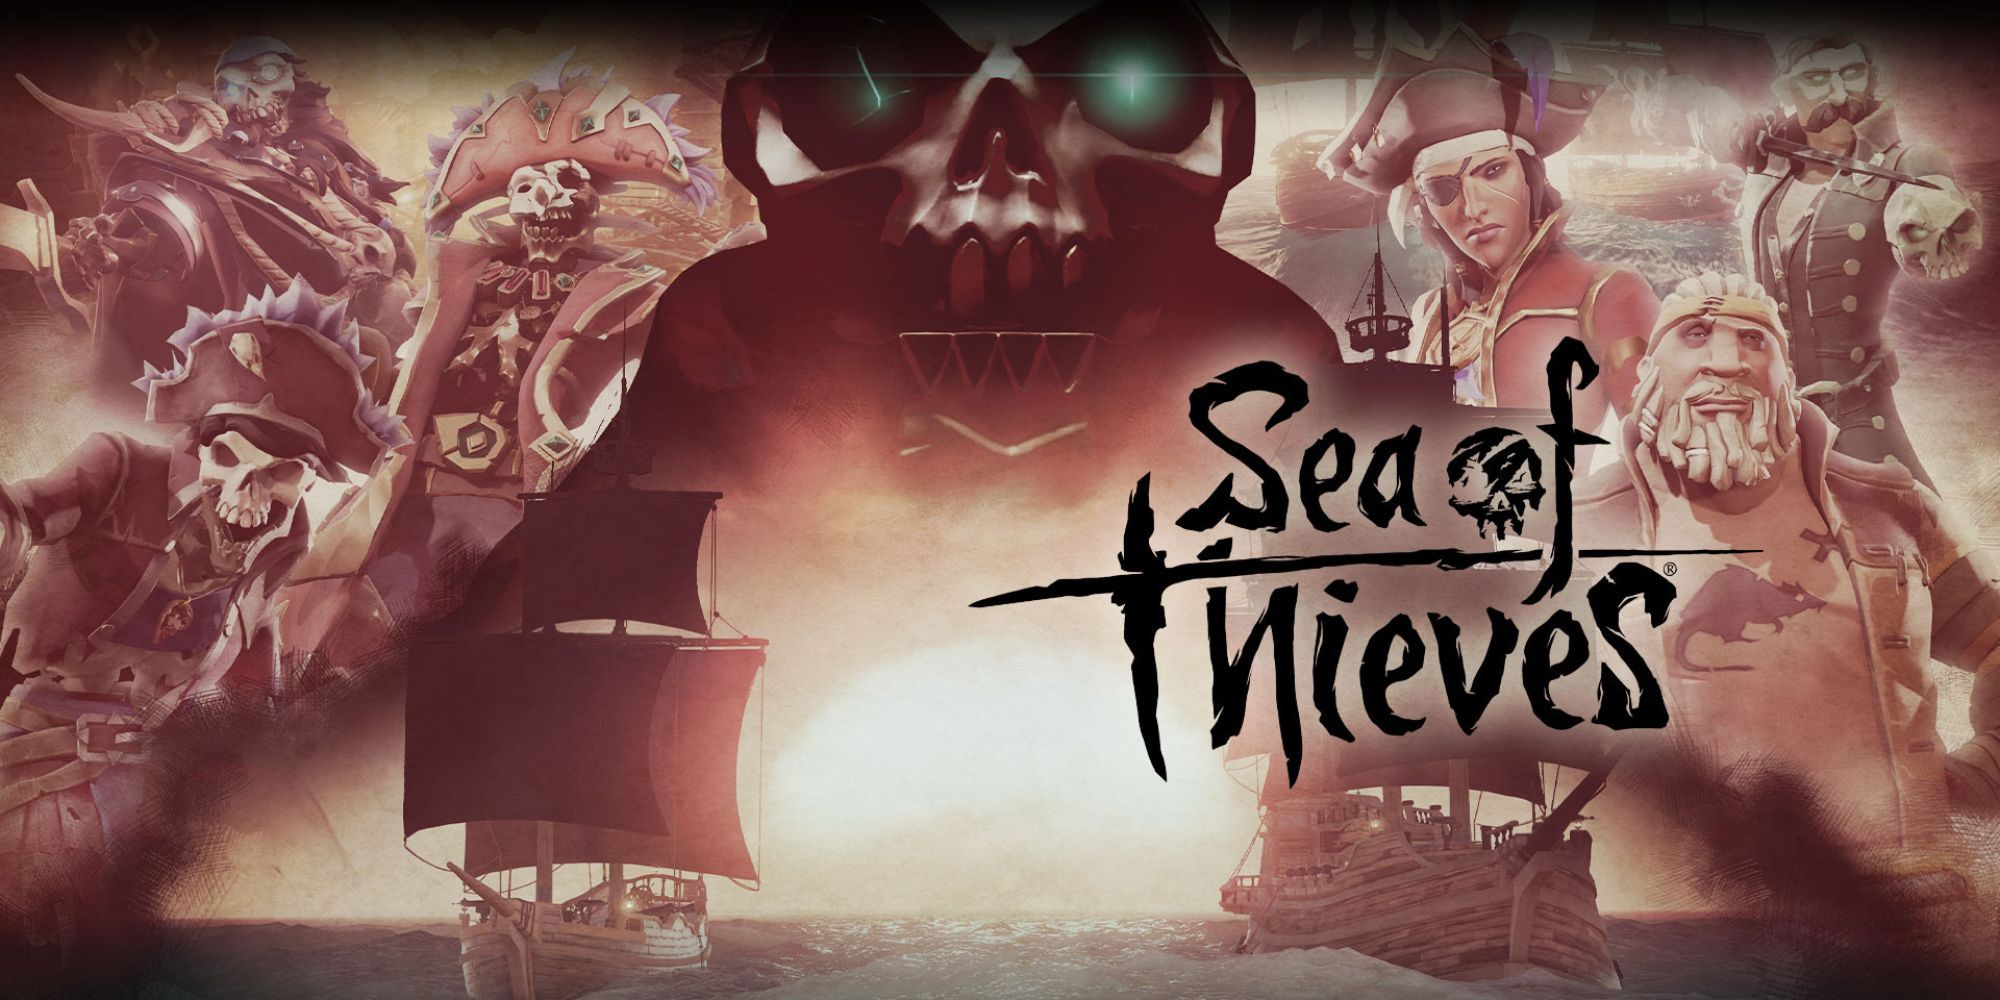 Sea of thieves title screen showing two ships and a myriad of characters in the background